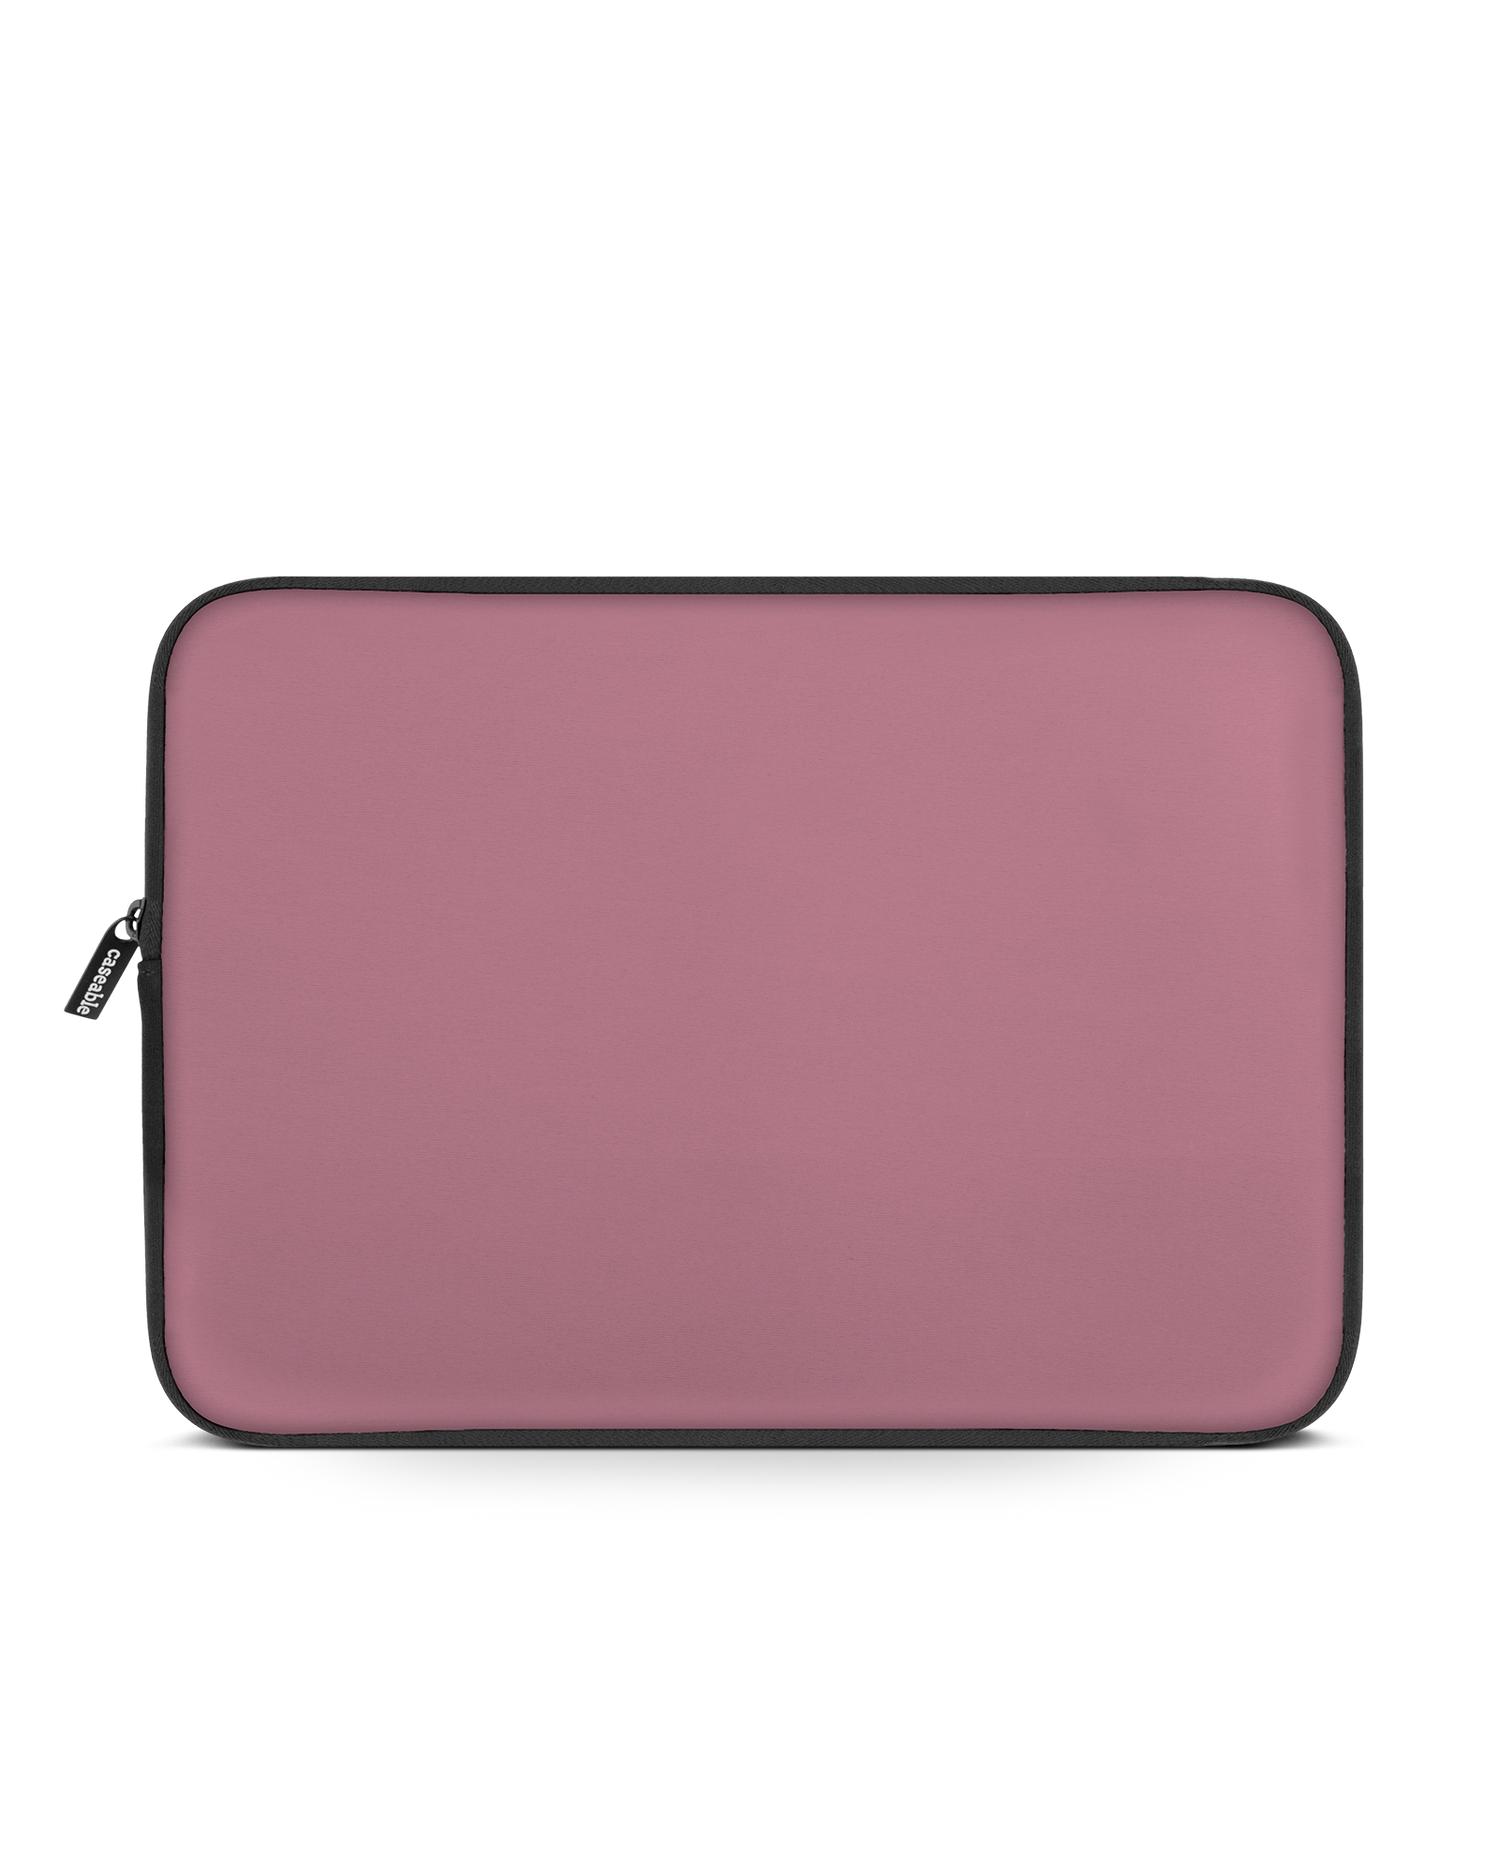 WILD ROSE Laptop Case 16 inch: Front View